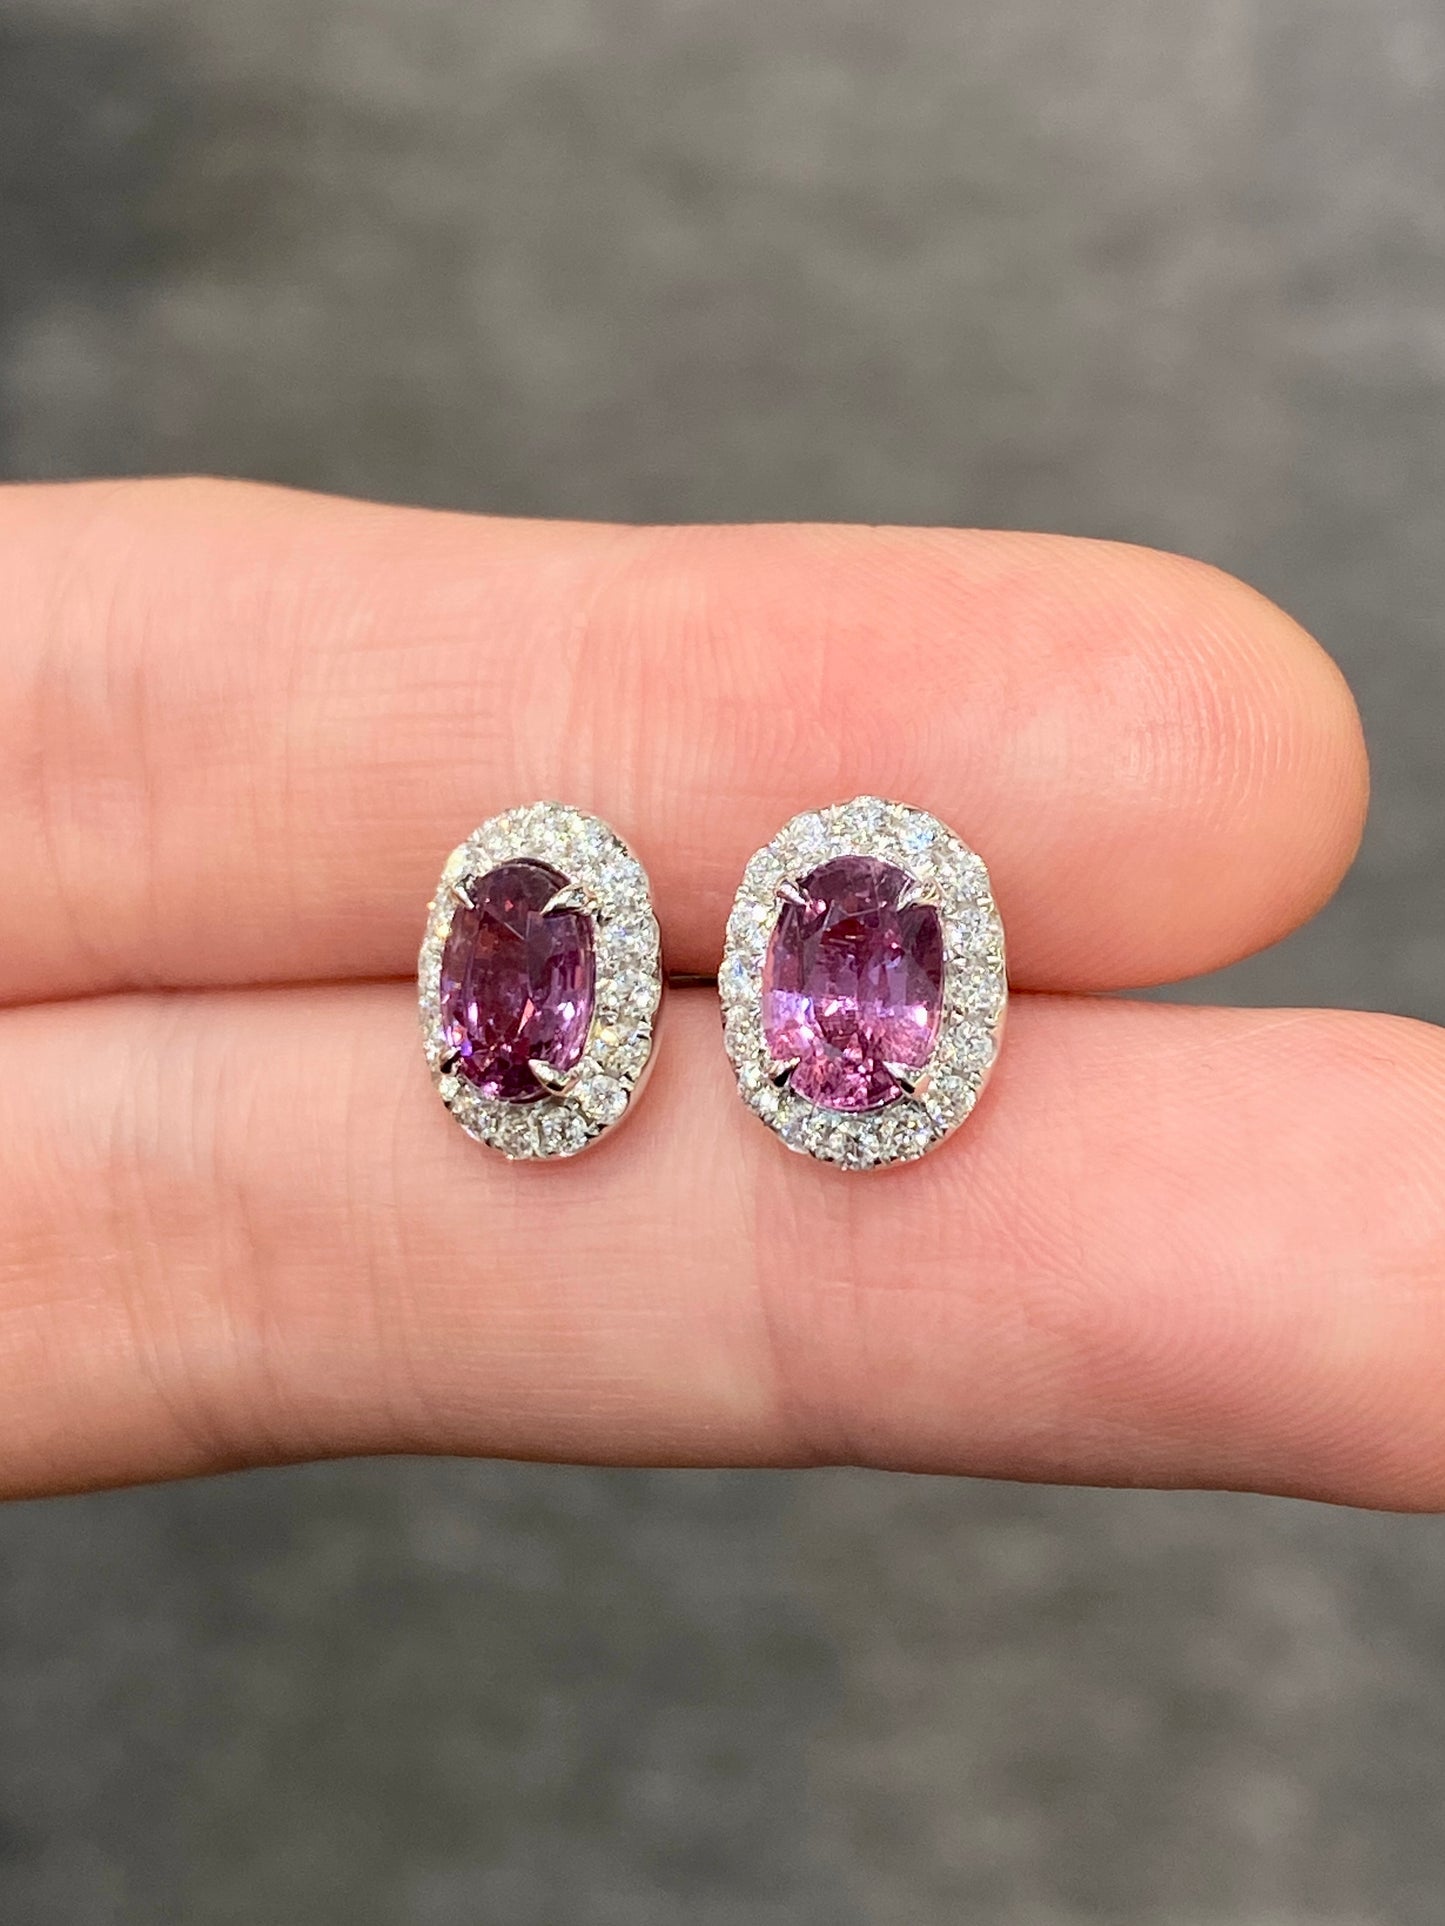 Natural Pink Sapphire 2.29ct Earrings set with Natural Diamonds in 18k White Gold Gemstone Jewellery